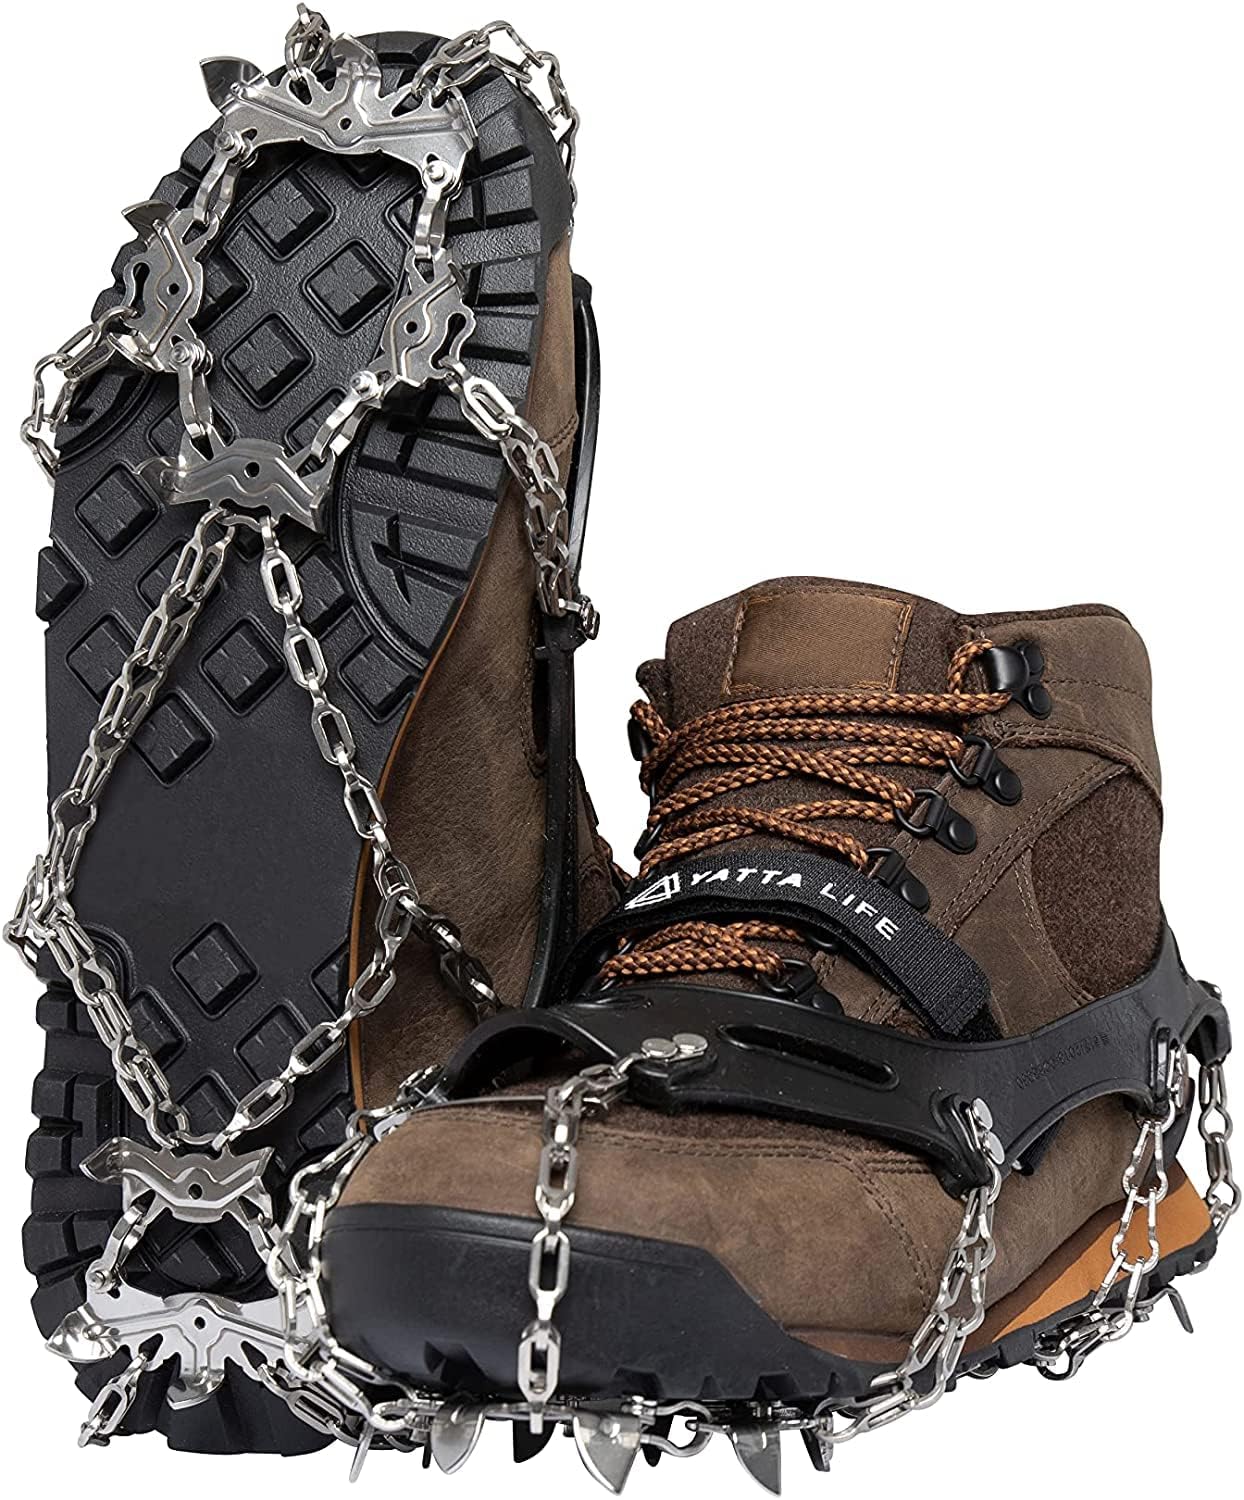 Yatta Life Trail Spikes for Shoes Crampons Ice Cleats [...]